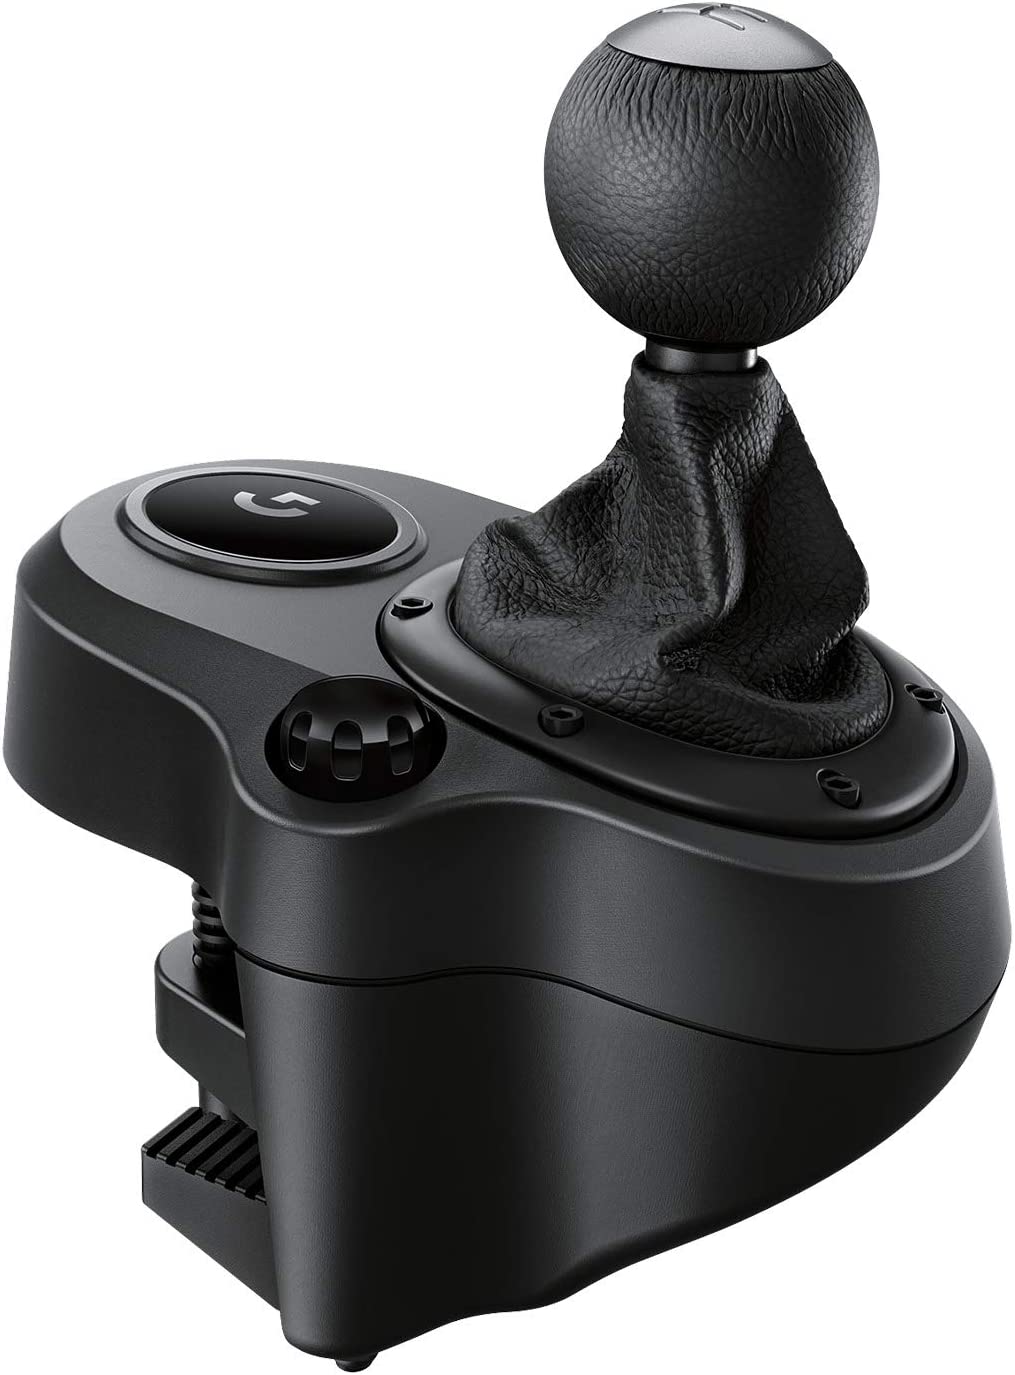 Logitech Driving Force Shifter for G29 &amp; G920 Racing Wheels - Black/Silver (Certified Refurbished)